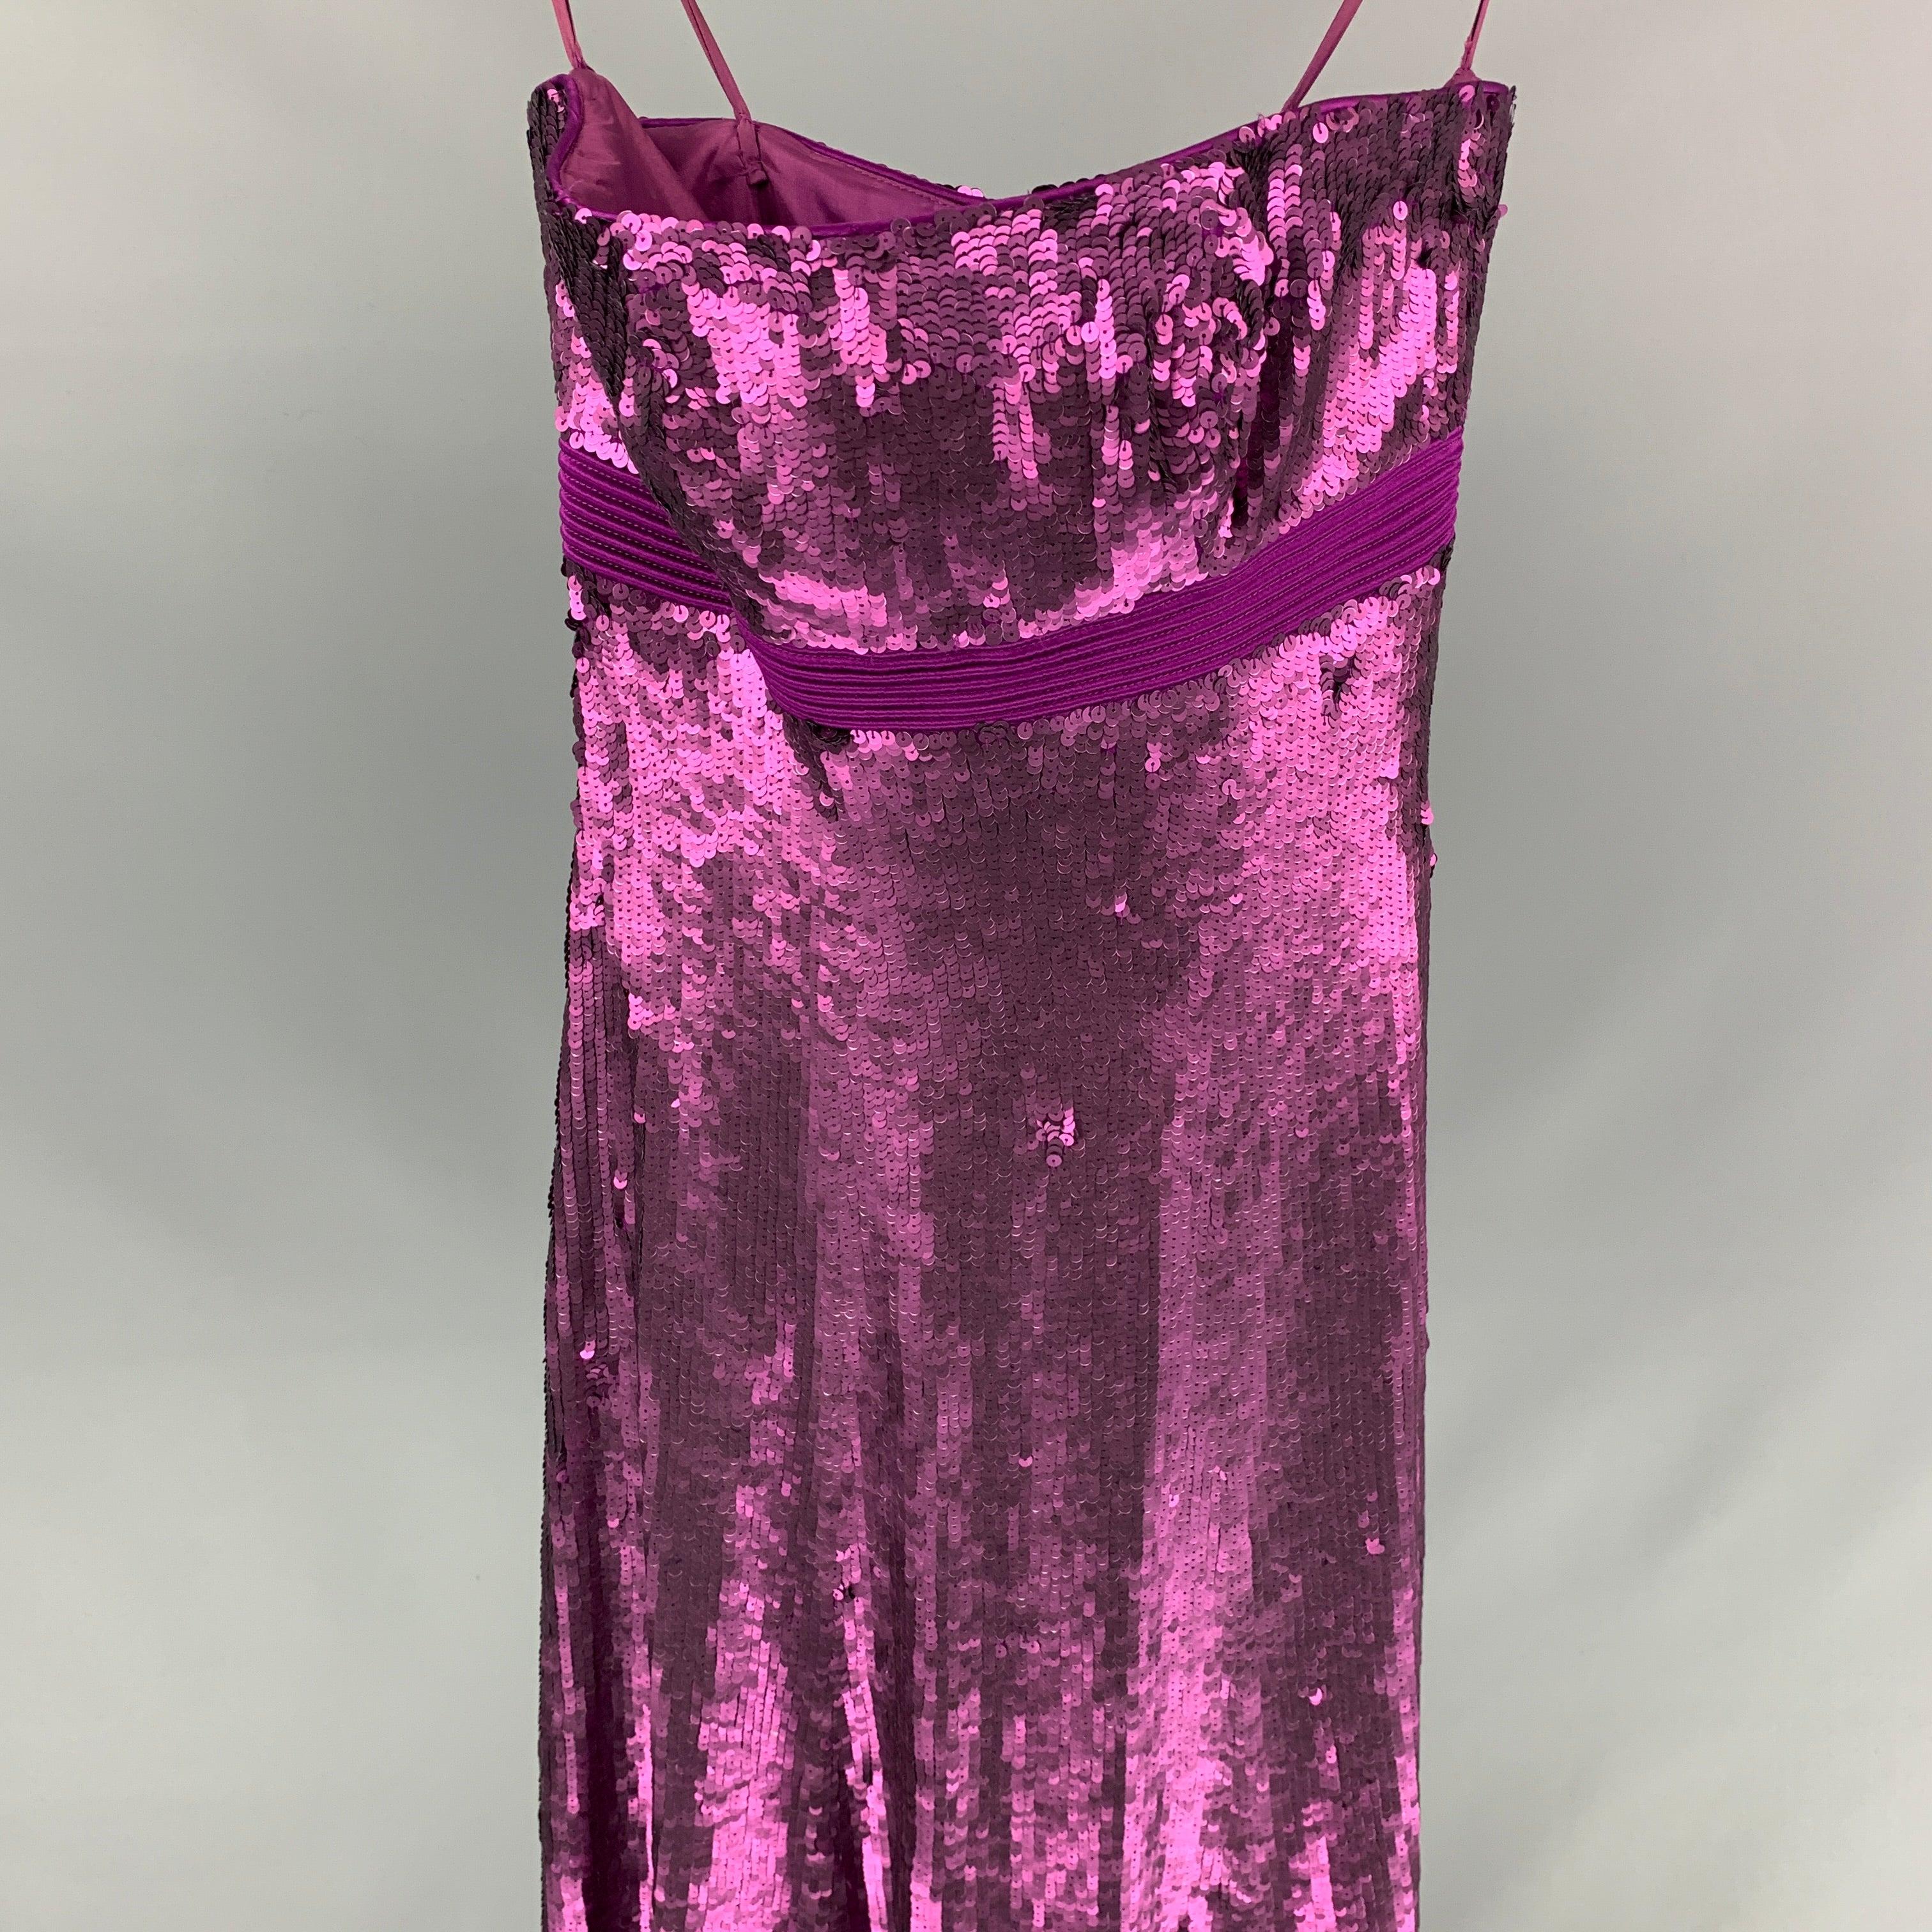 BADGLEY MISCHKA dress comes in a purple sequined silk with a slip liner featuring a strapless style, a-line, ribbed trim, and a back zip up closure.
Very Good
Pre-Owned Condition. Fabric tag removed.  

Marked:   0 

Measurements: 
  Bust: 28 inches